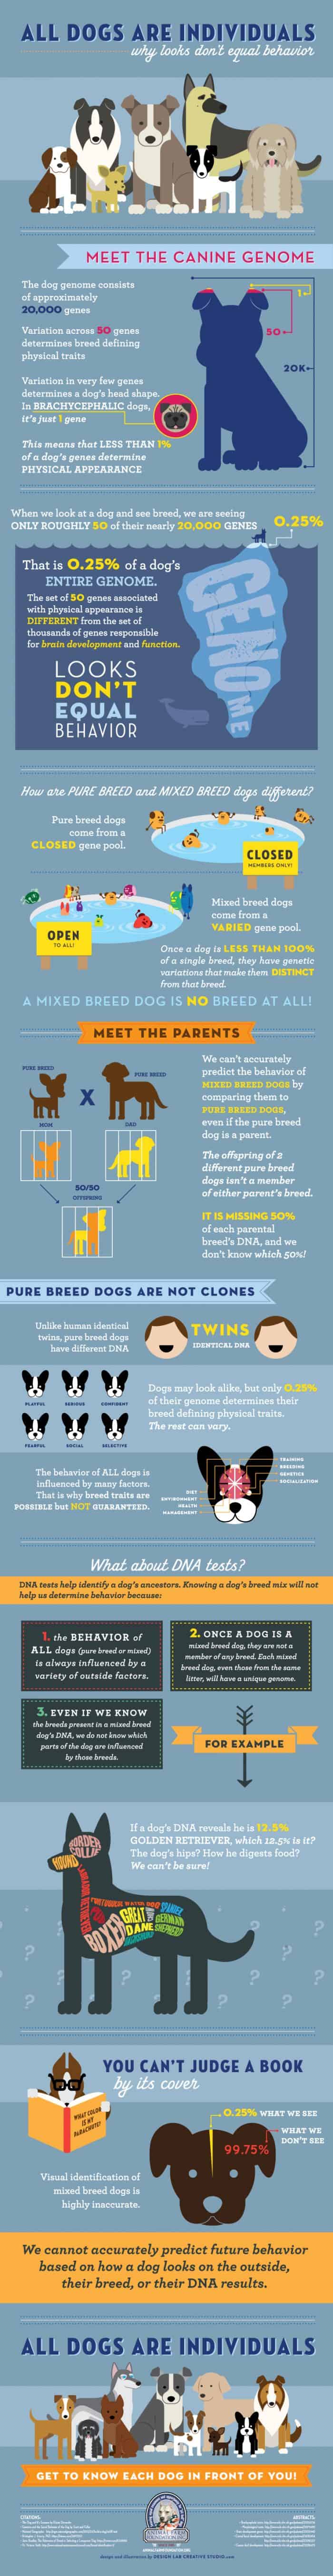 Dog breed doesn't define personality infographic